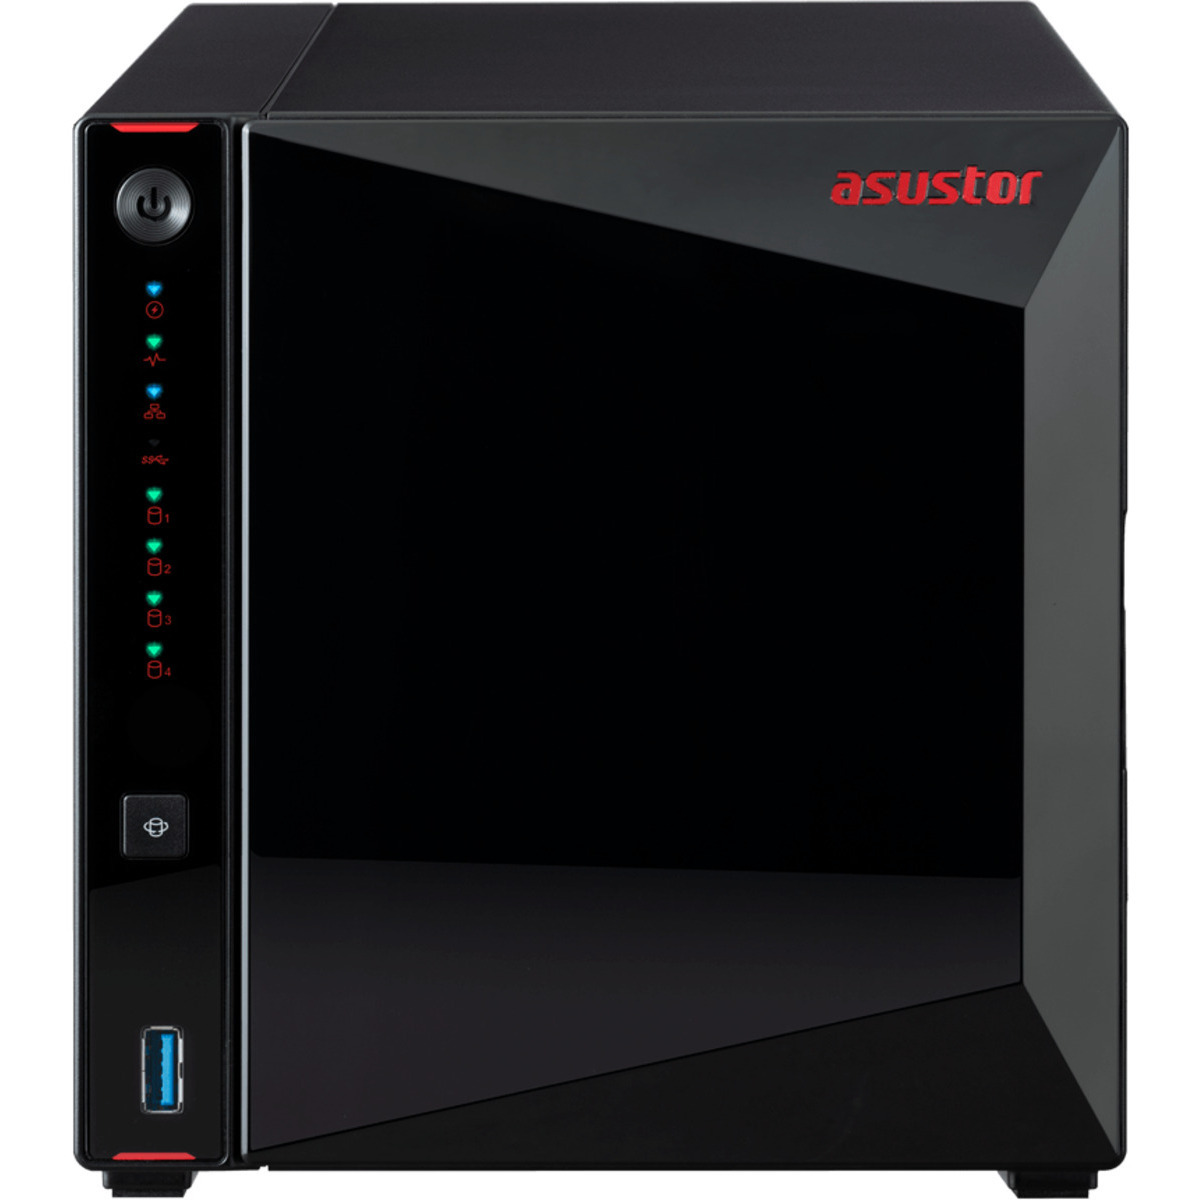 ASUSTOR AS5304T Nimbustor 32tb 4-Bay Desktop Multimedia / Power User / Business NAS - Network Attached Storage Device 4x8tb Seagate IronWolf Pro ST8000NT001 3.5 7200rpm SATA 6Gb/s HDD NAS Class Drives Installed - Burn-In Tested - ON SALE - FREE RAM UPGRADE AS5304T Nimbustor